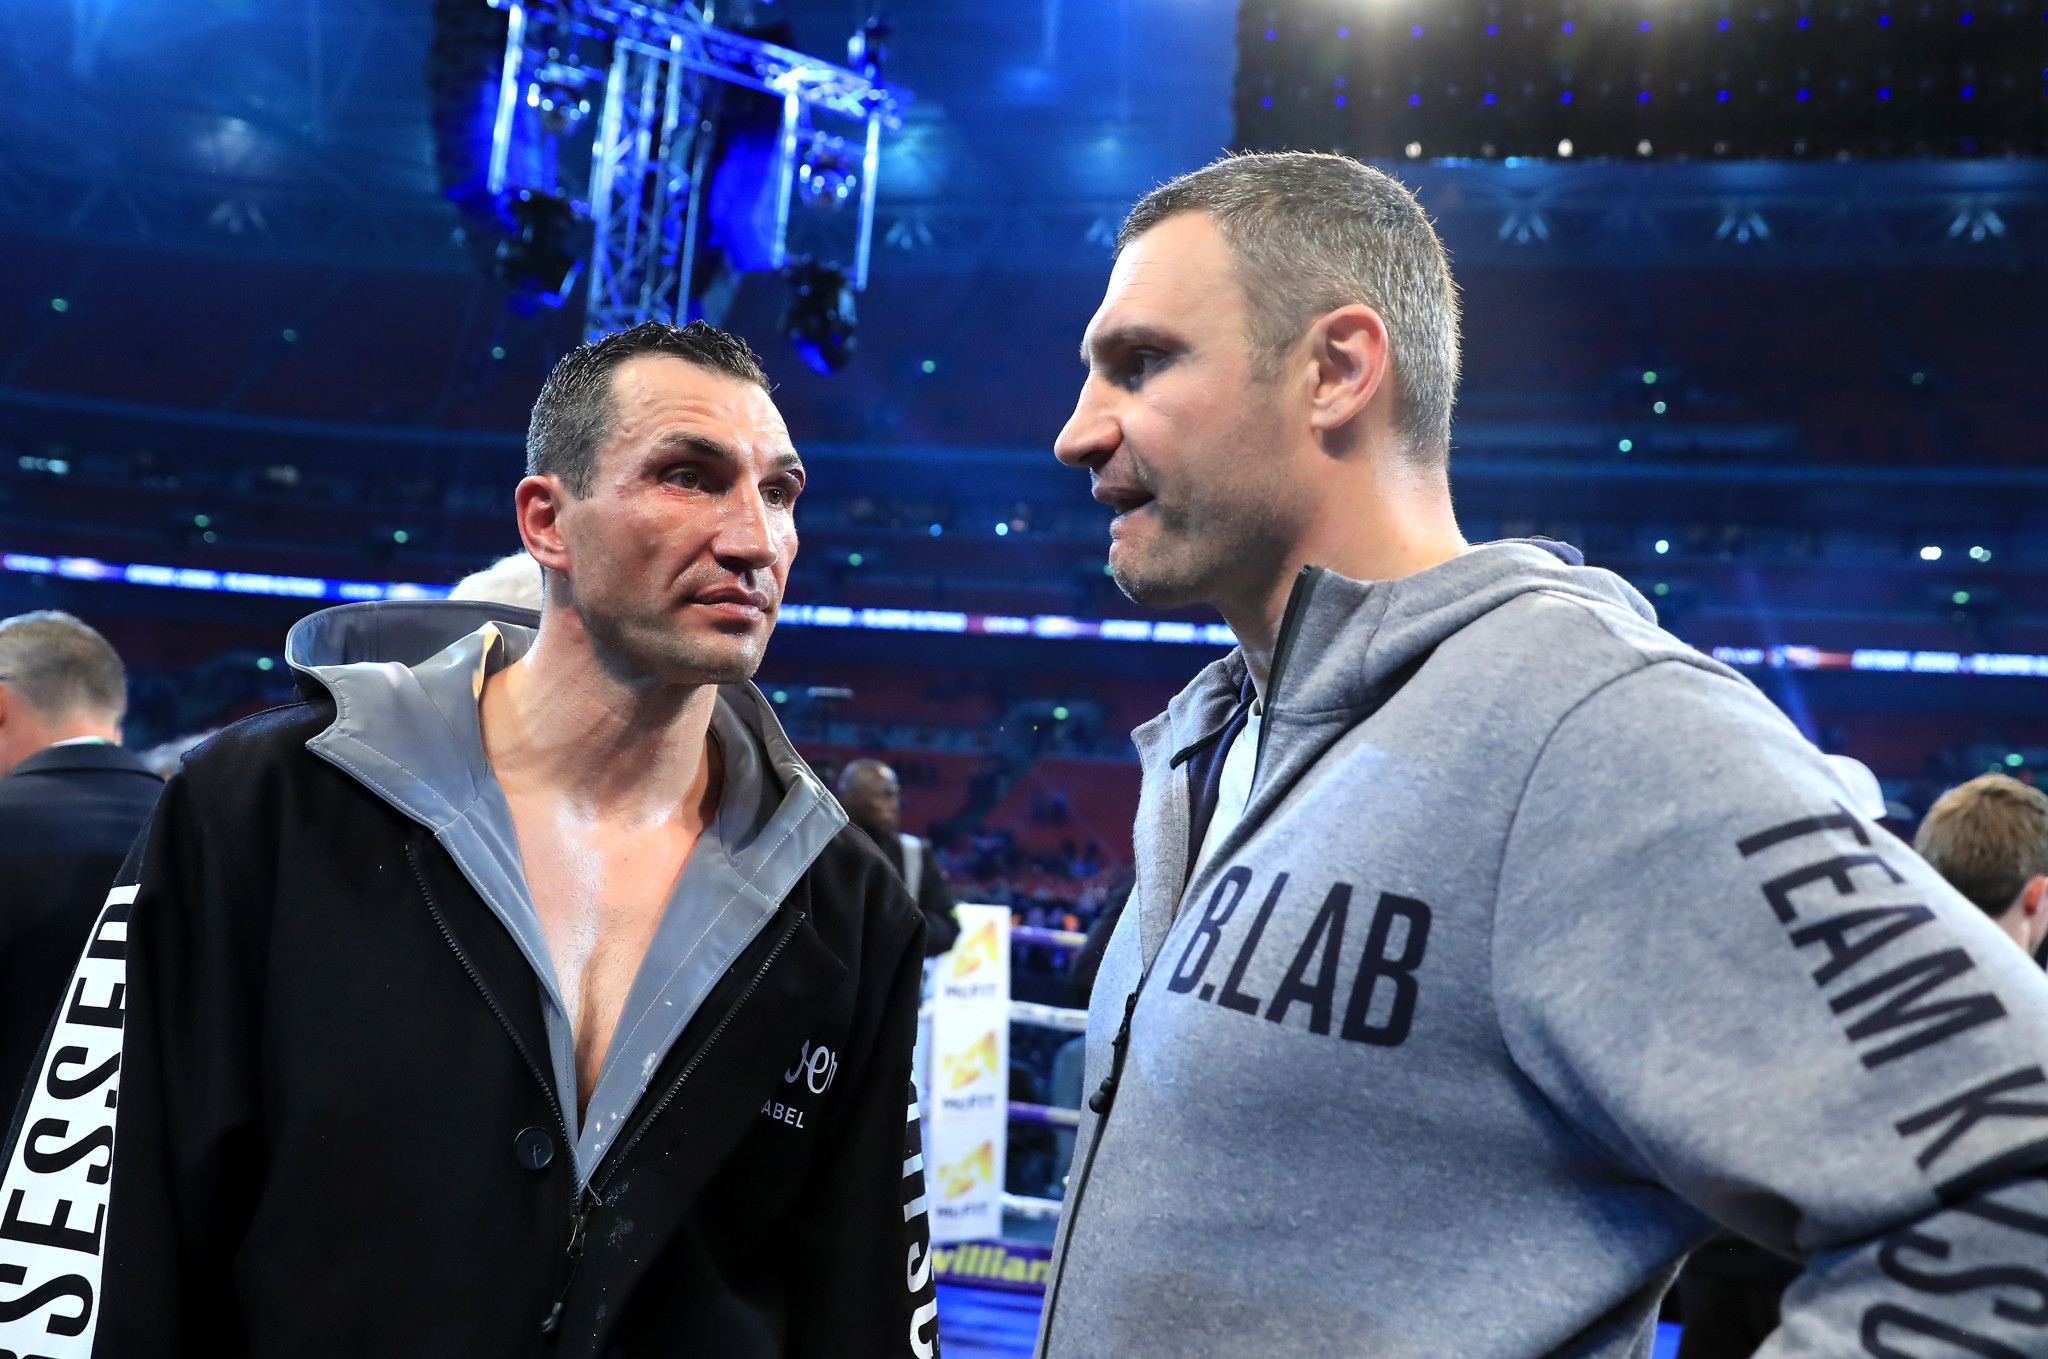 Boxers Wladimir, left, and Vitali Klitschko are among the many sports stars making an impact on and off the field for Ukraine ©Getty Images